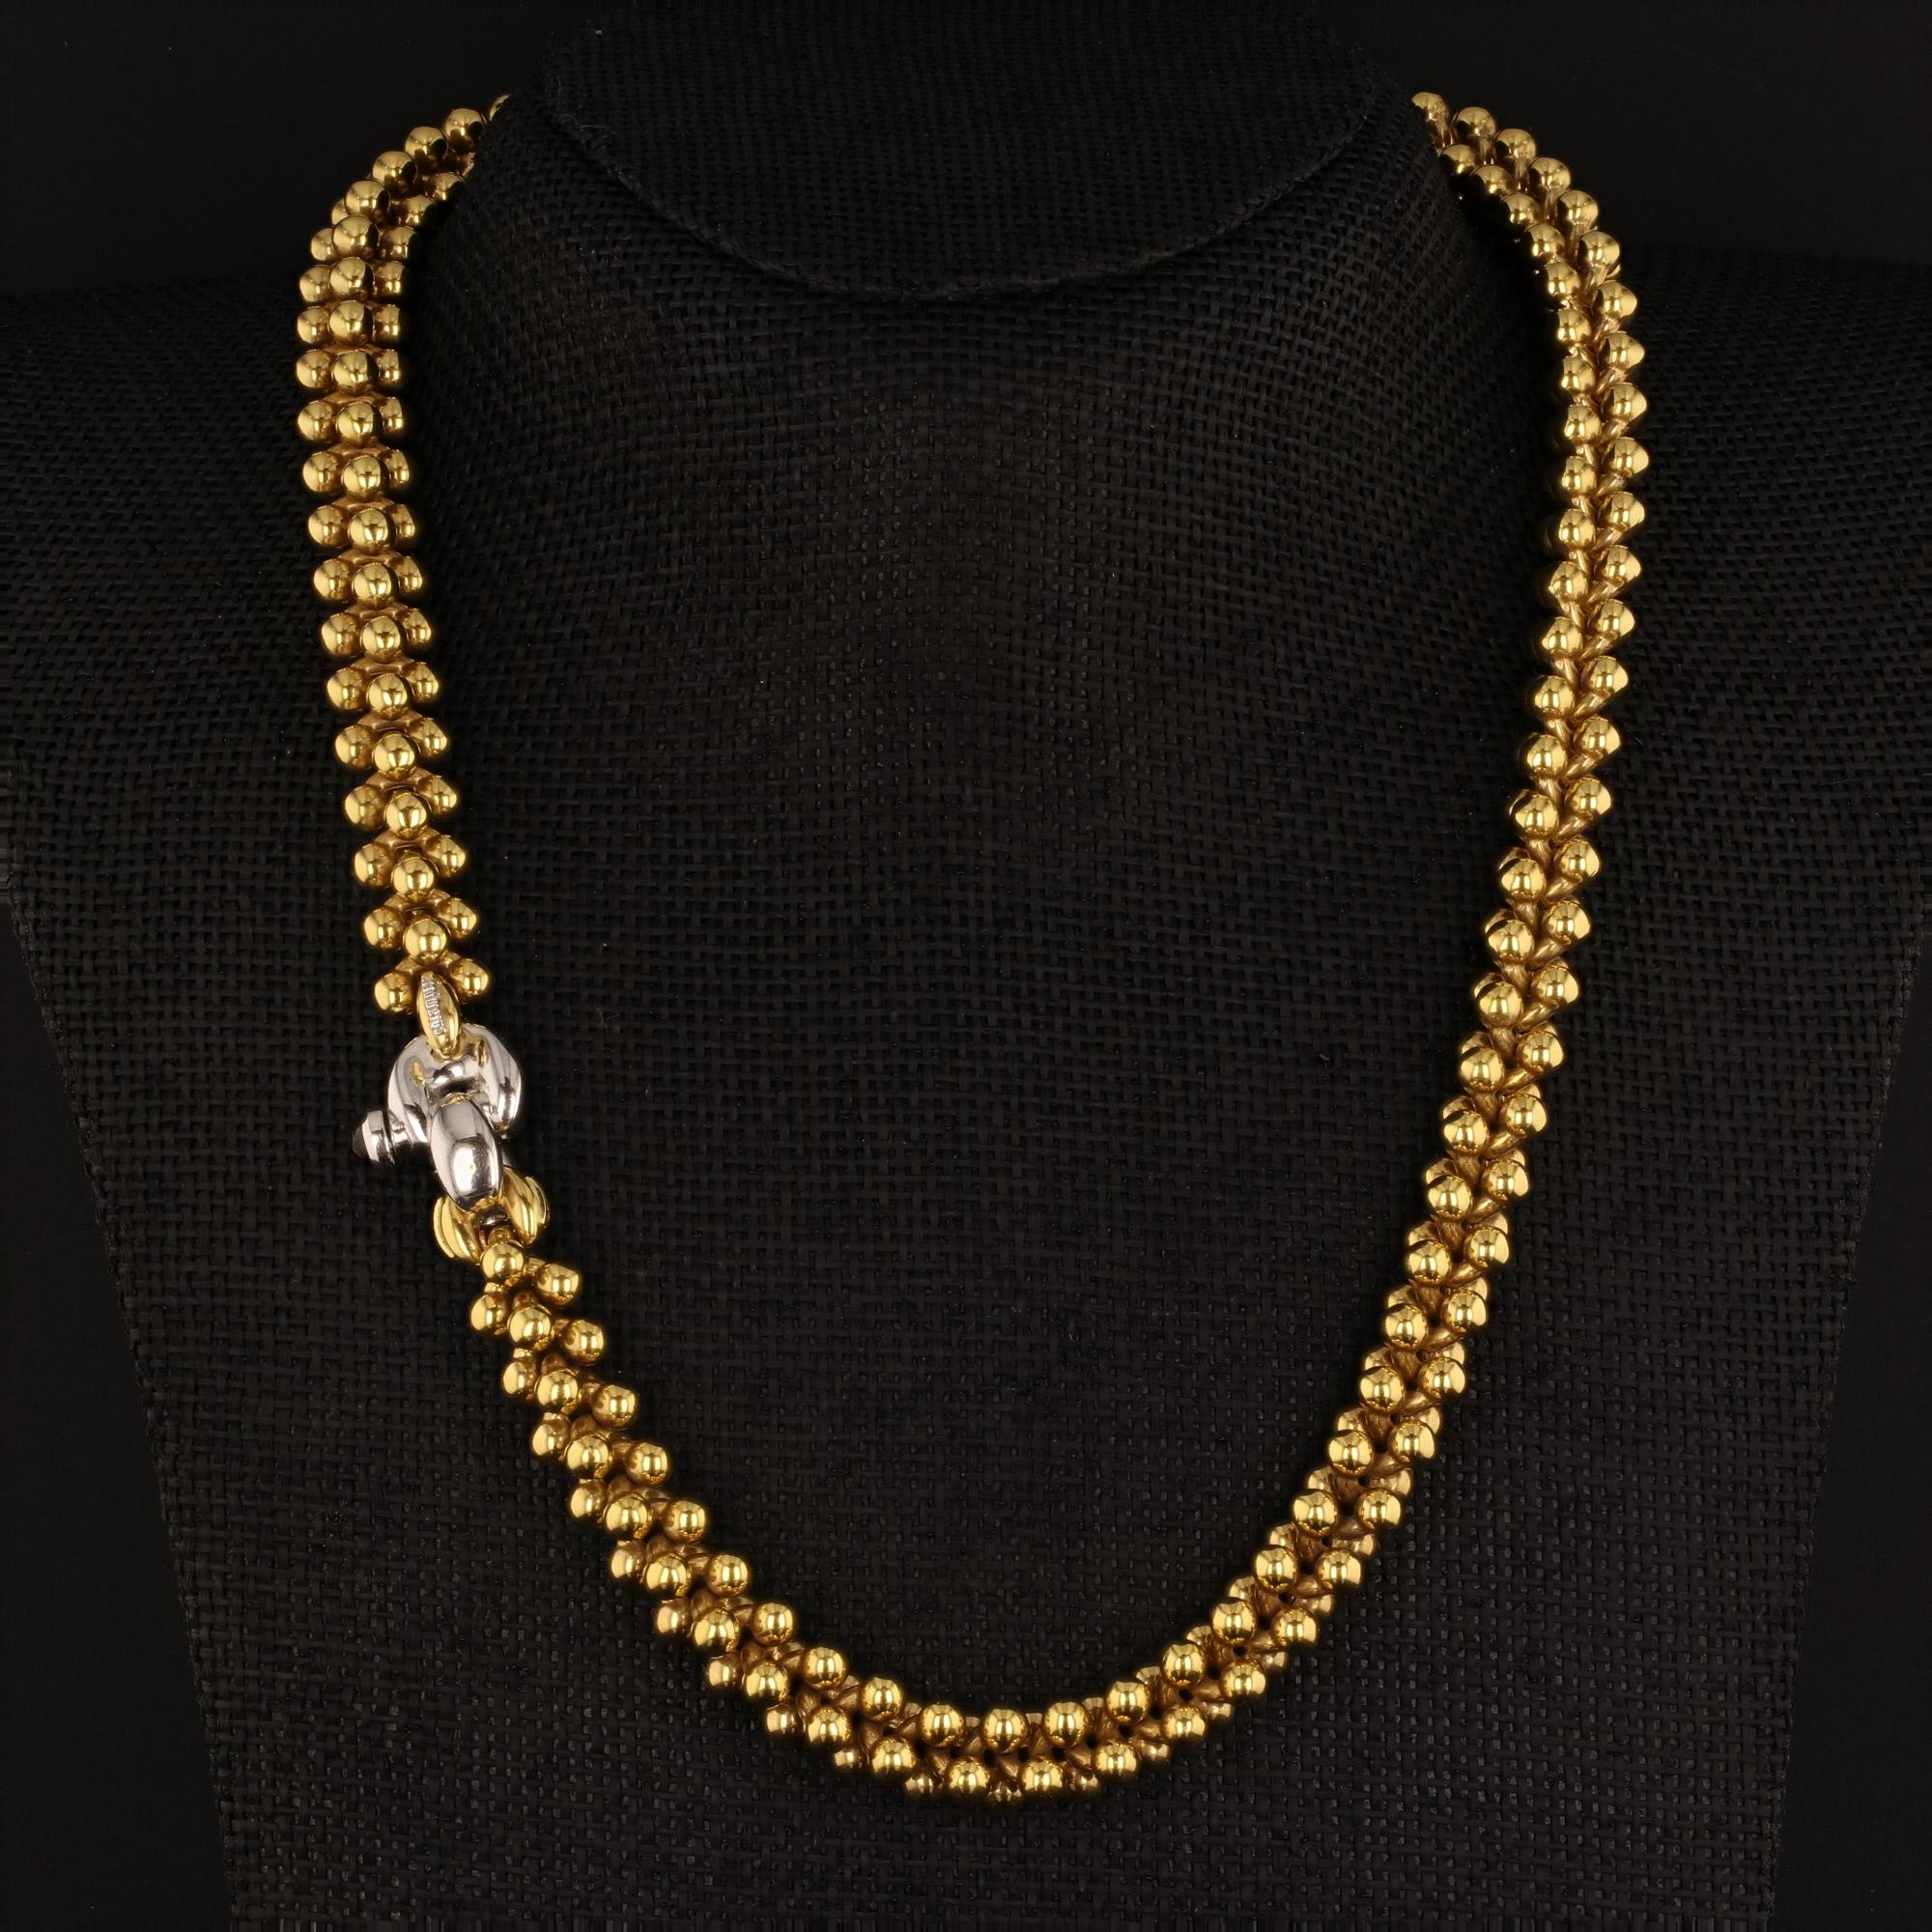 This statement 18K yellow gold solid chunky bead link necklace is Italian made and signed by Chiampesan, offered by Alex & Co. This unique necklace is designed with interlocking bead links and features a 18K white gold clasp with a cabochon ruby